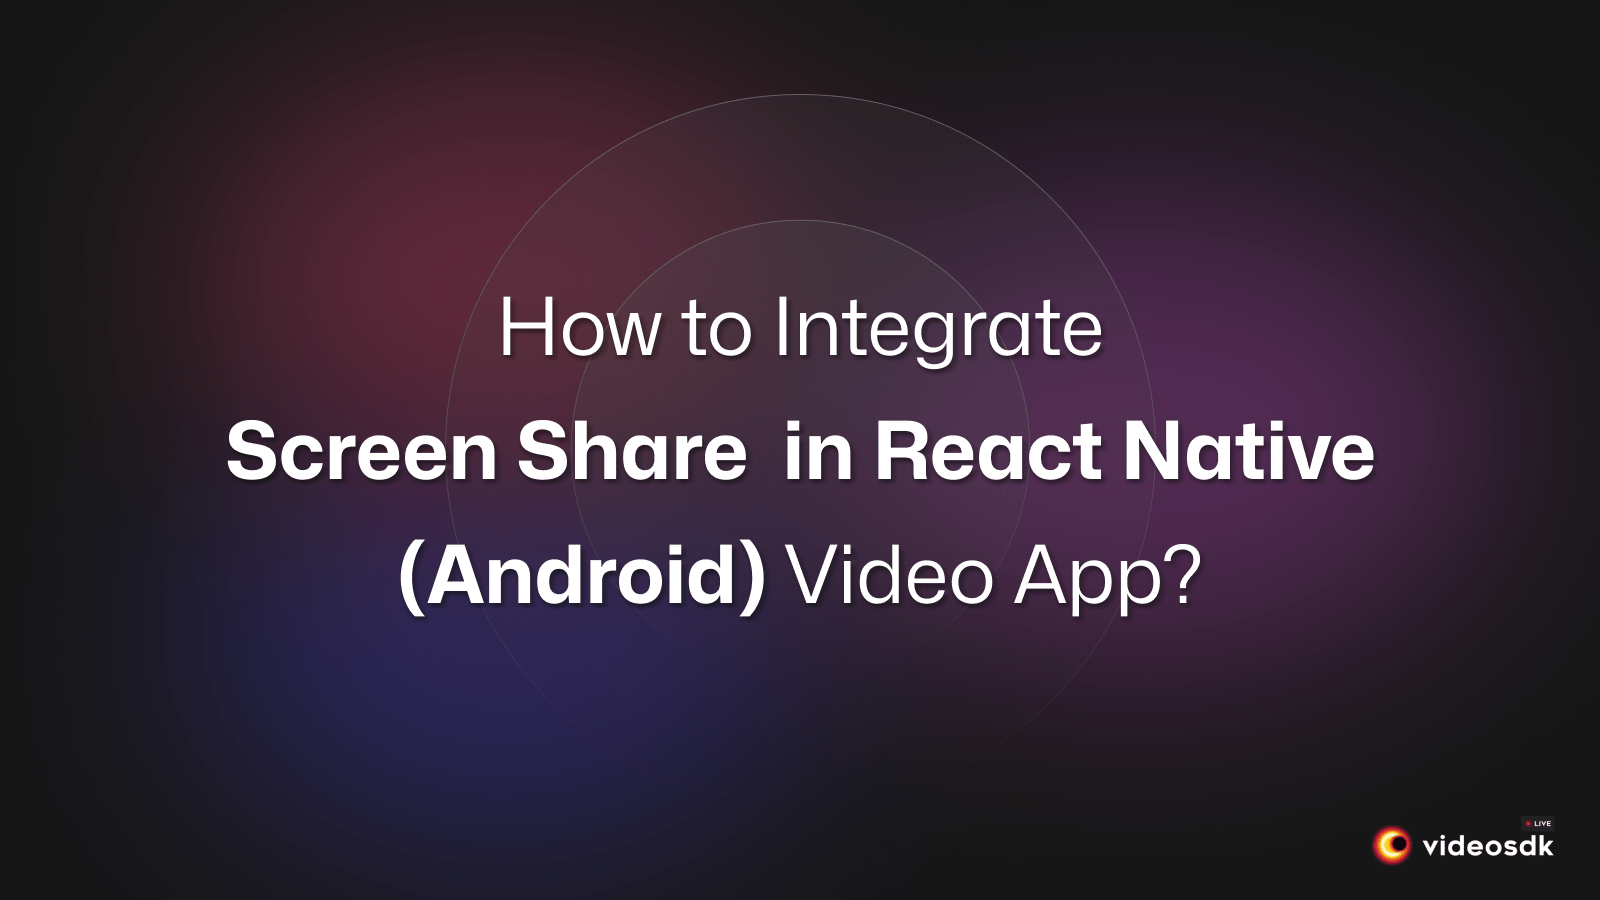 How to Integrate Screen Share in React Native (Android) Video Call App?